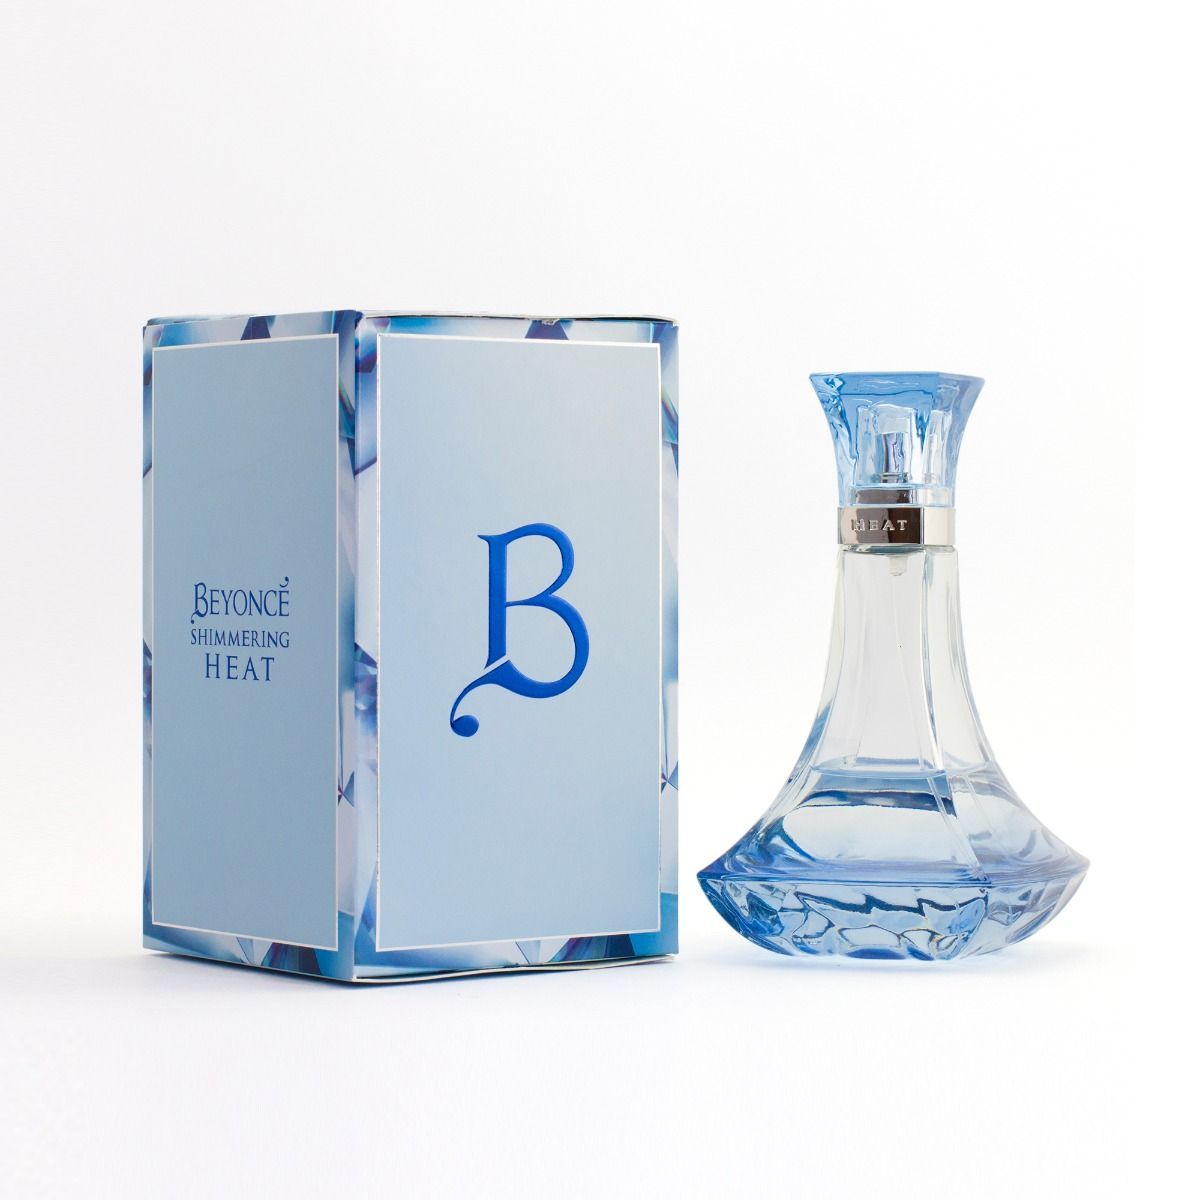 Beyoncé Shimmering Heat is a floral woody musk fragrance with a spectacular blend of rich florals and sexy woods. The rare Blue Mystique Orchid electrifies the exotic bouquet heart and adds a radiant elegance.